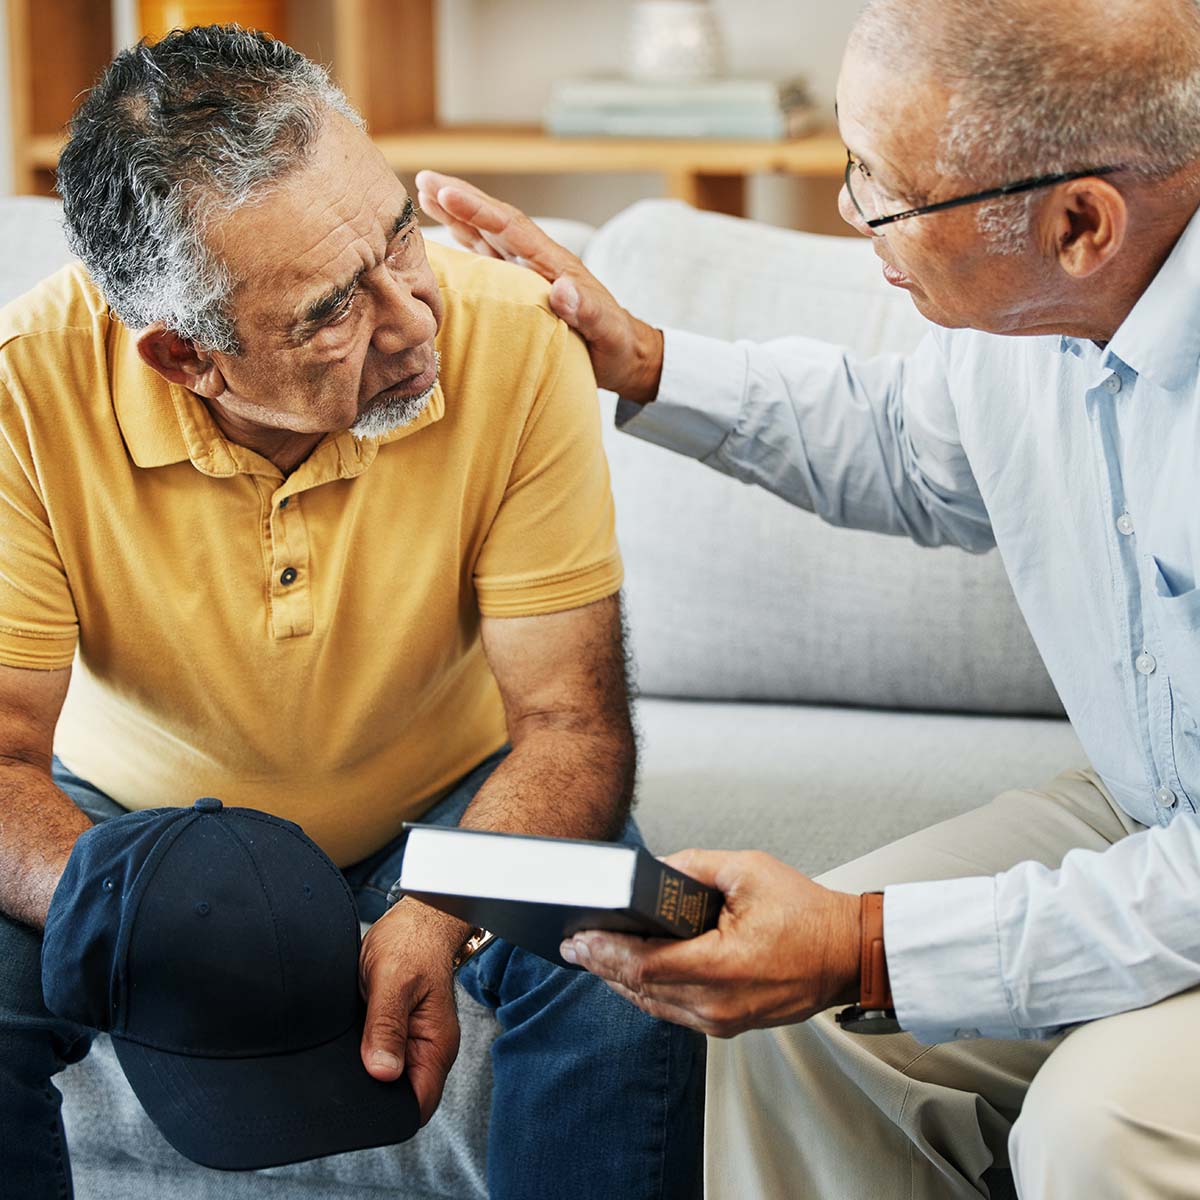 A pastor provides support to a male senior.